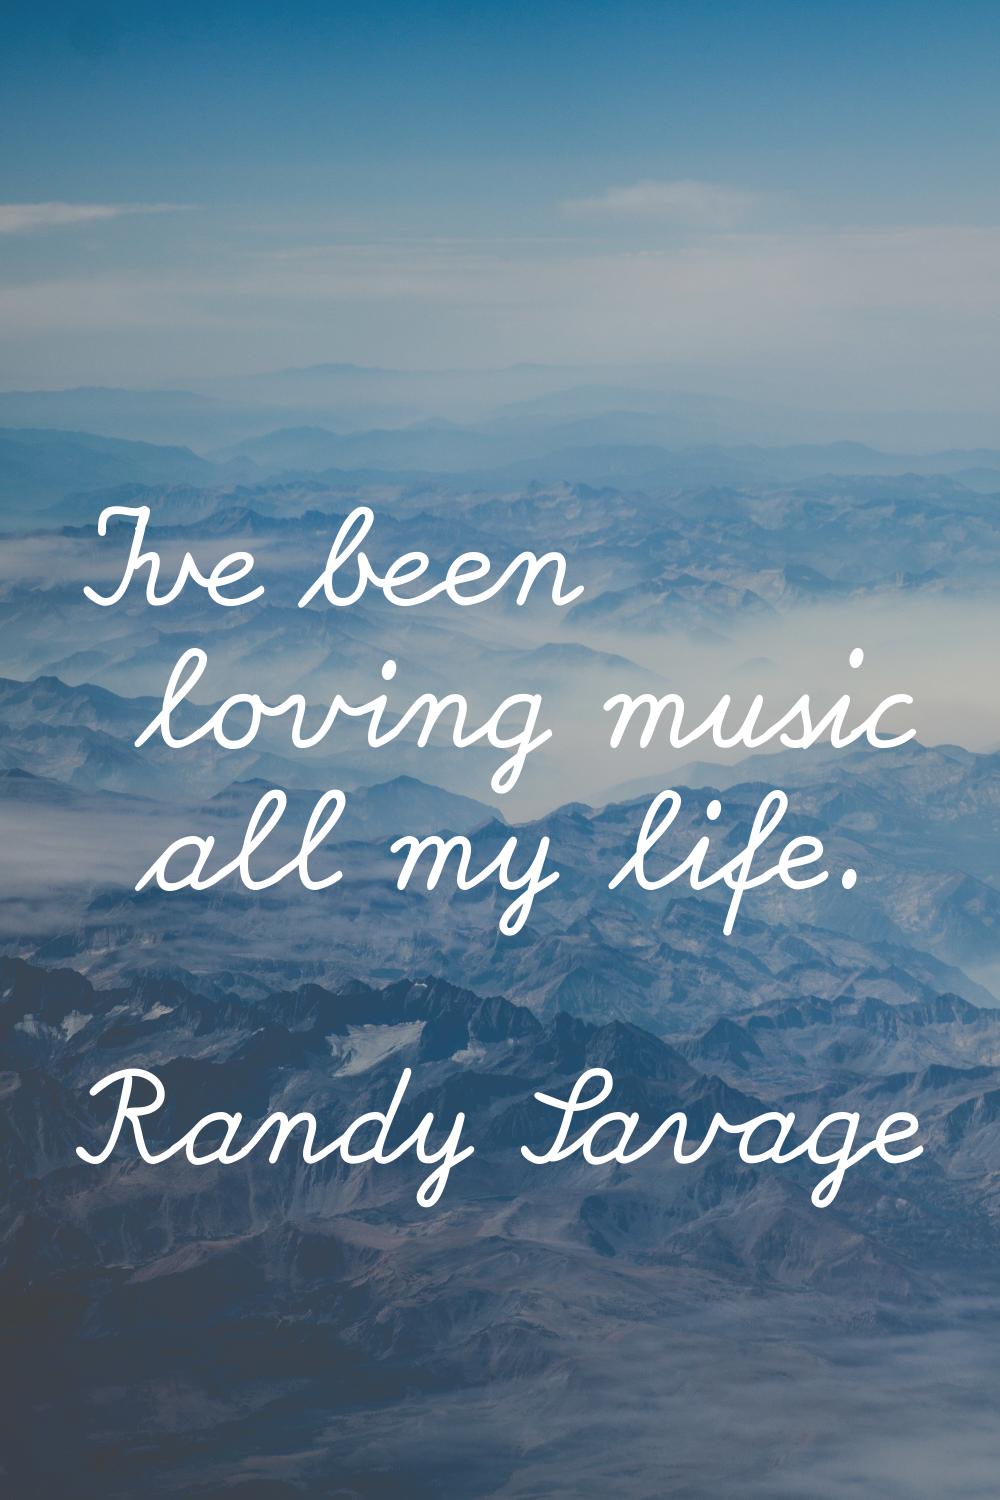 I've been loving music all my life.